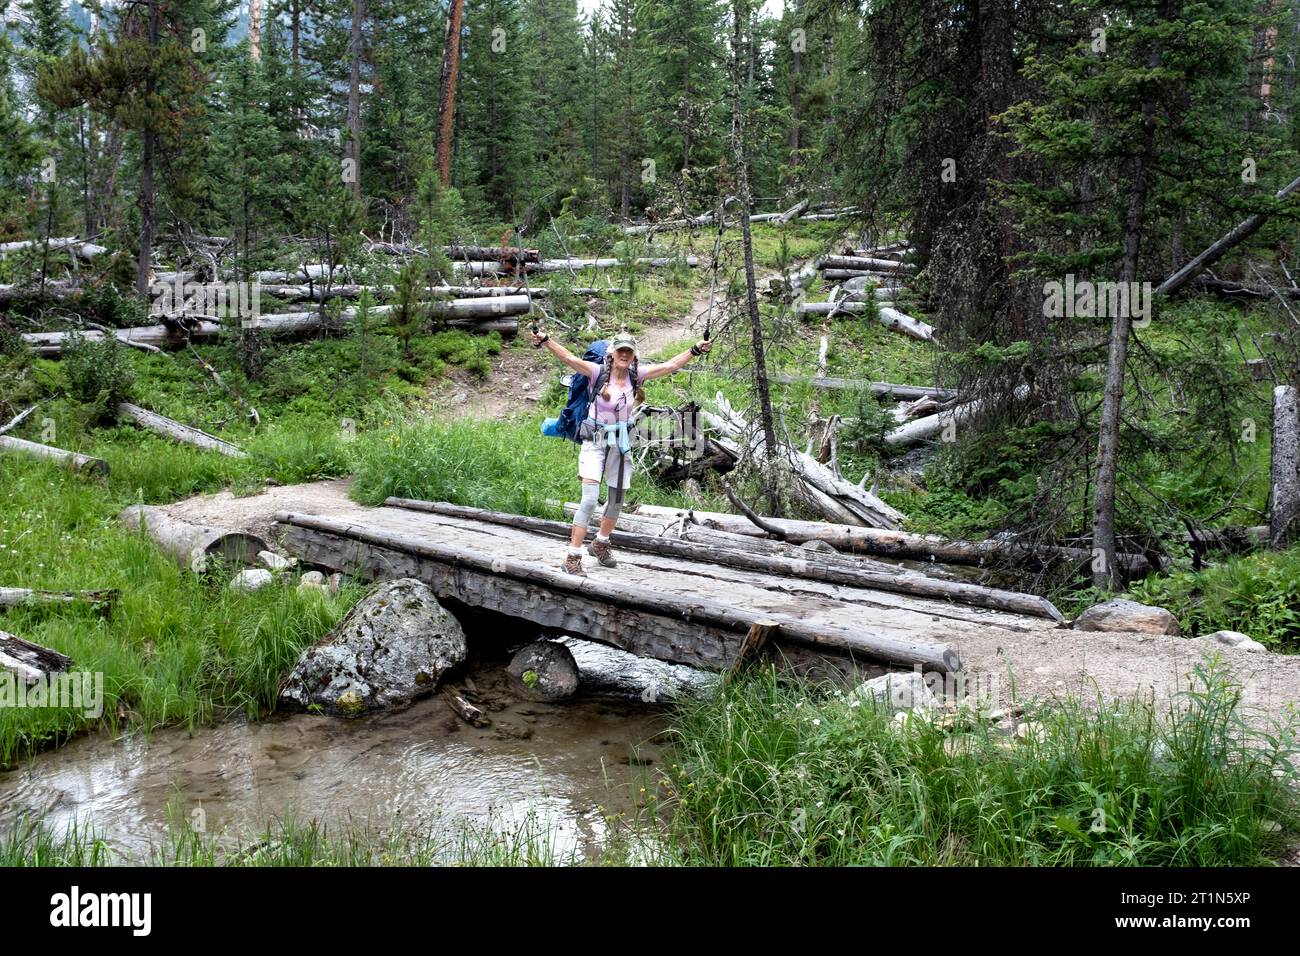 WY05489-00....WYOMING - Backpacker celebrates a bridge along the Porcupine Trail in the Bridger Wilderness, Bridger National Forest. MR#S1 Stock Photo